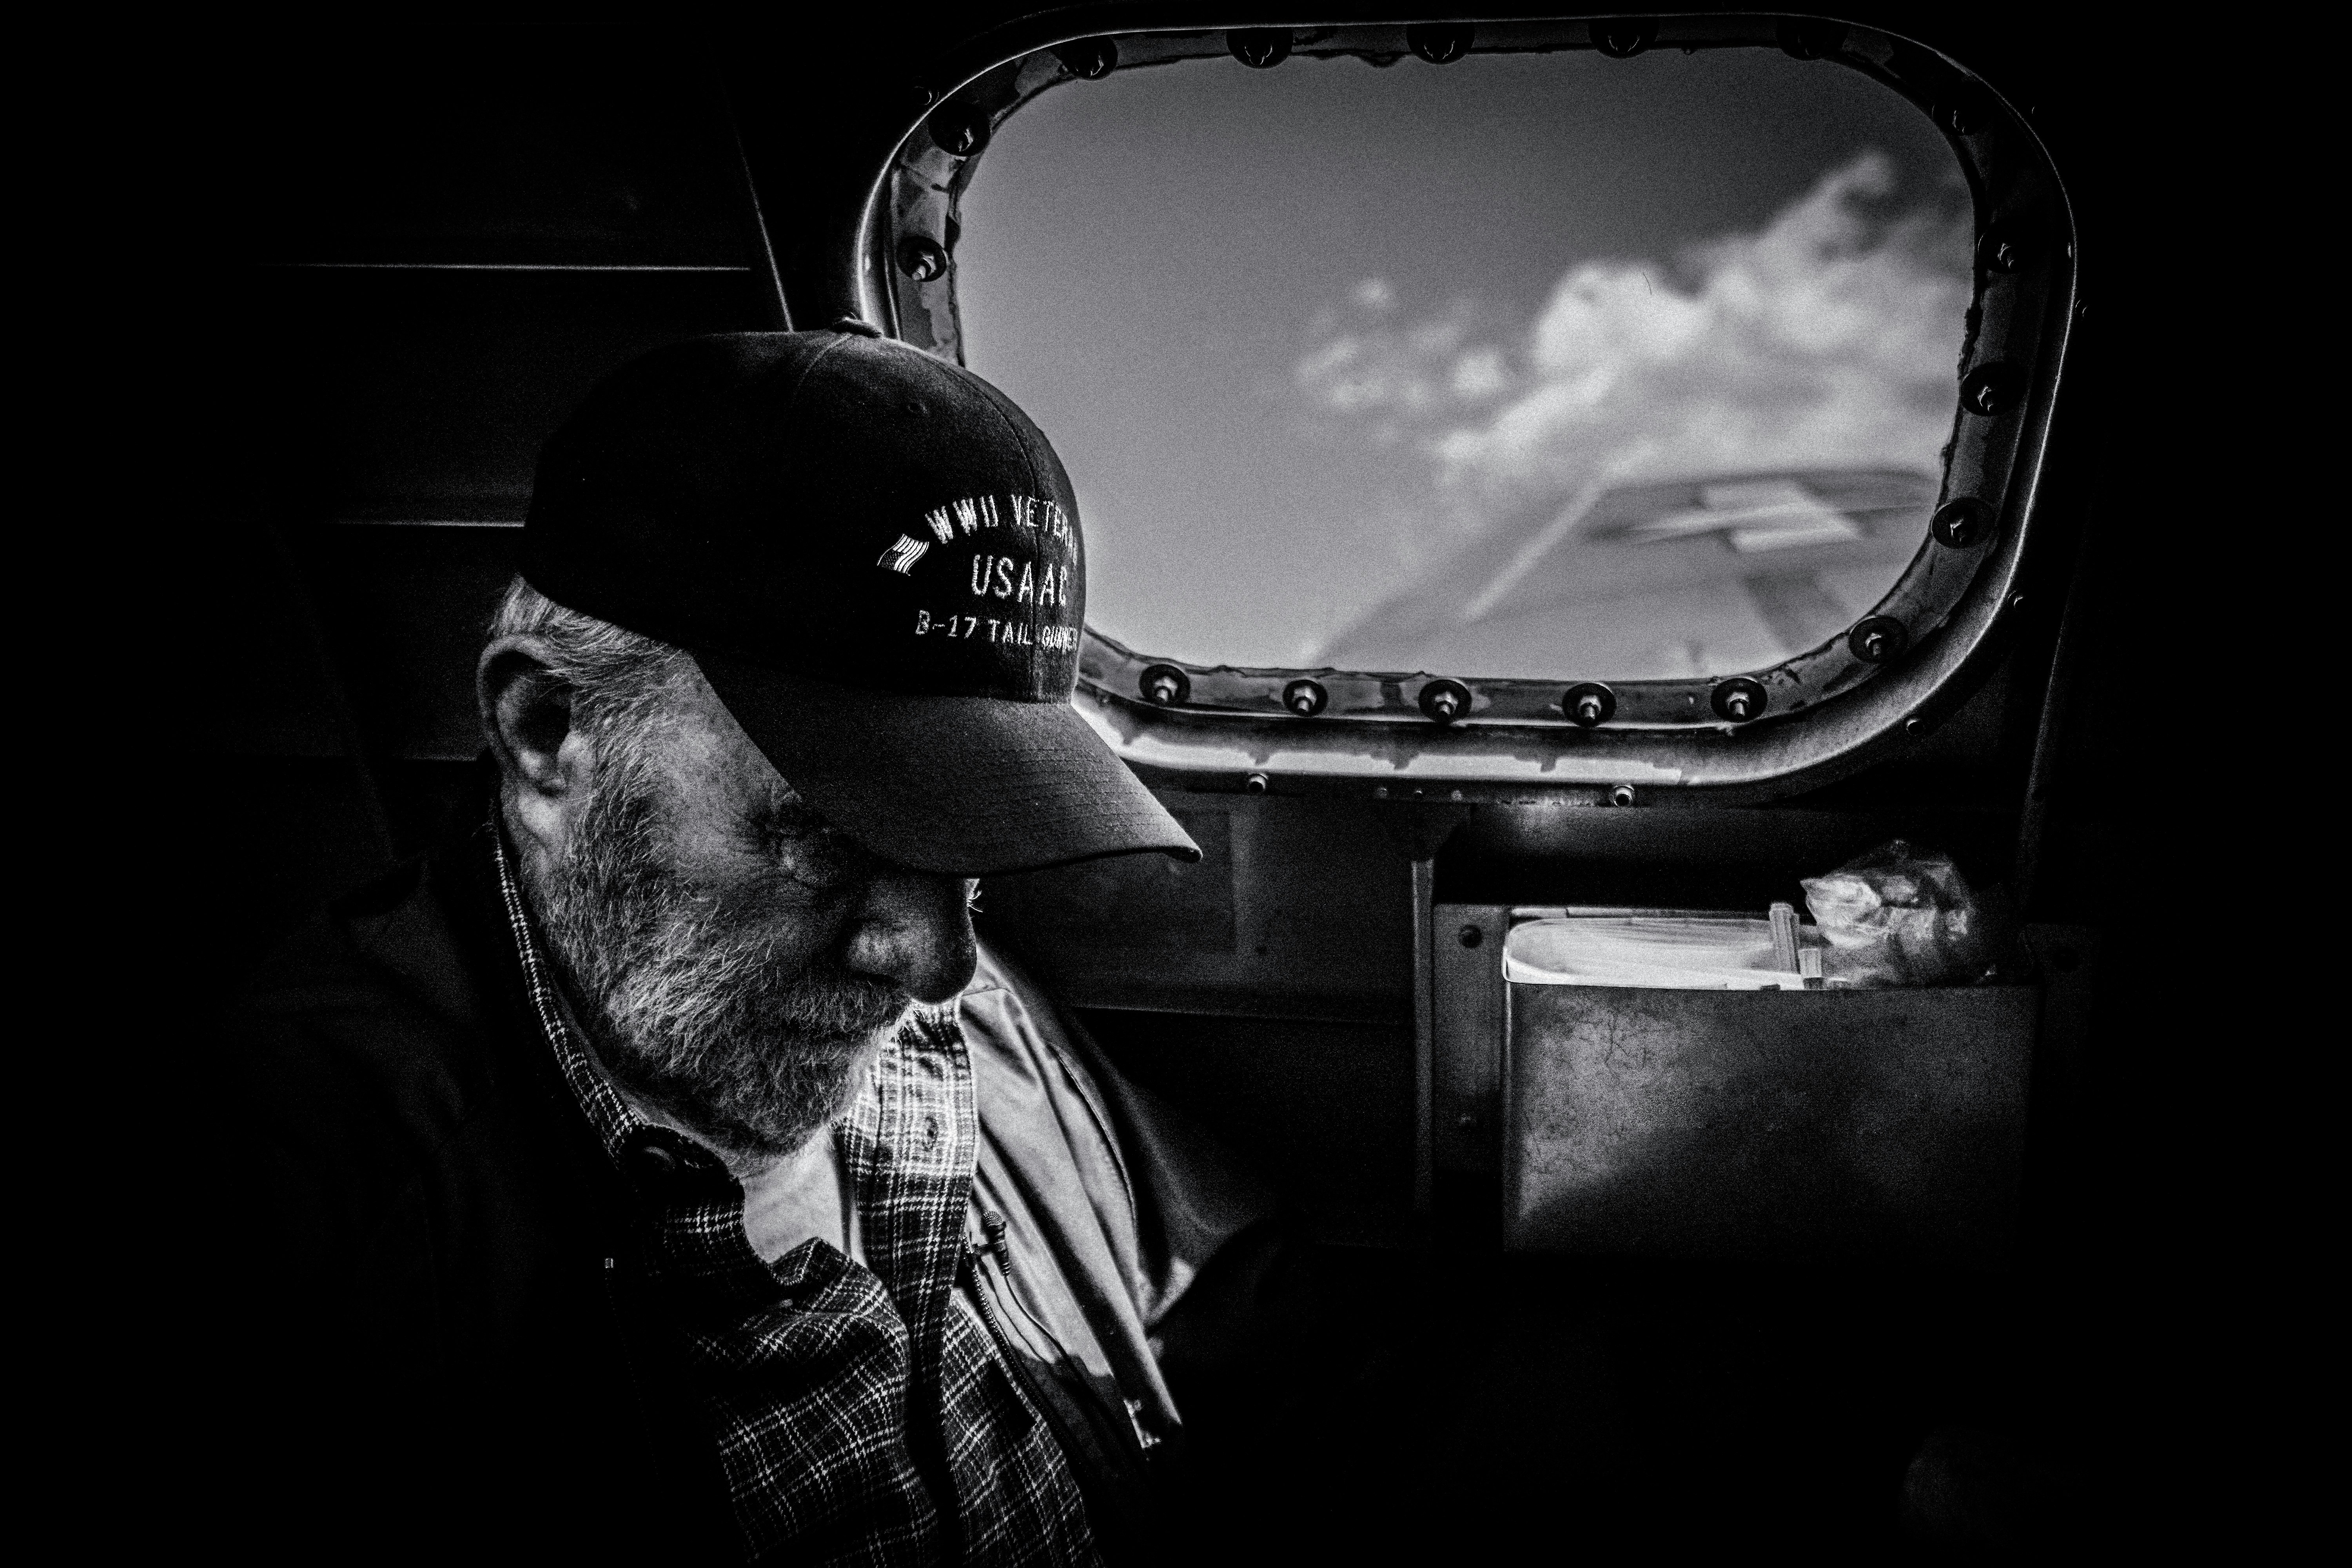 grayscale photo of man in plaid shirt and cap looking at the sky